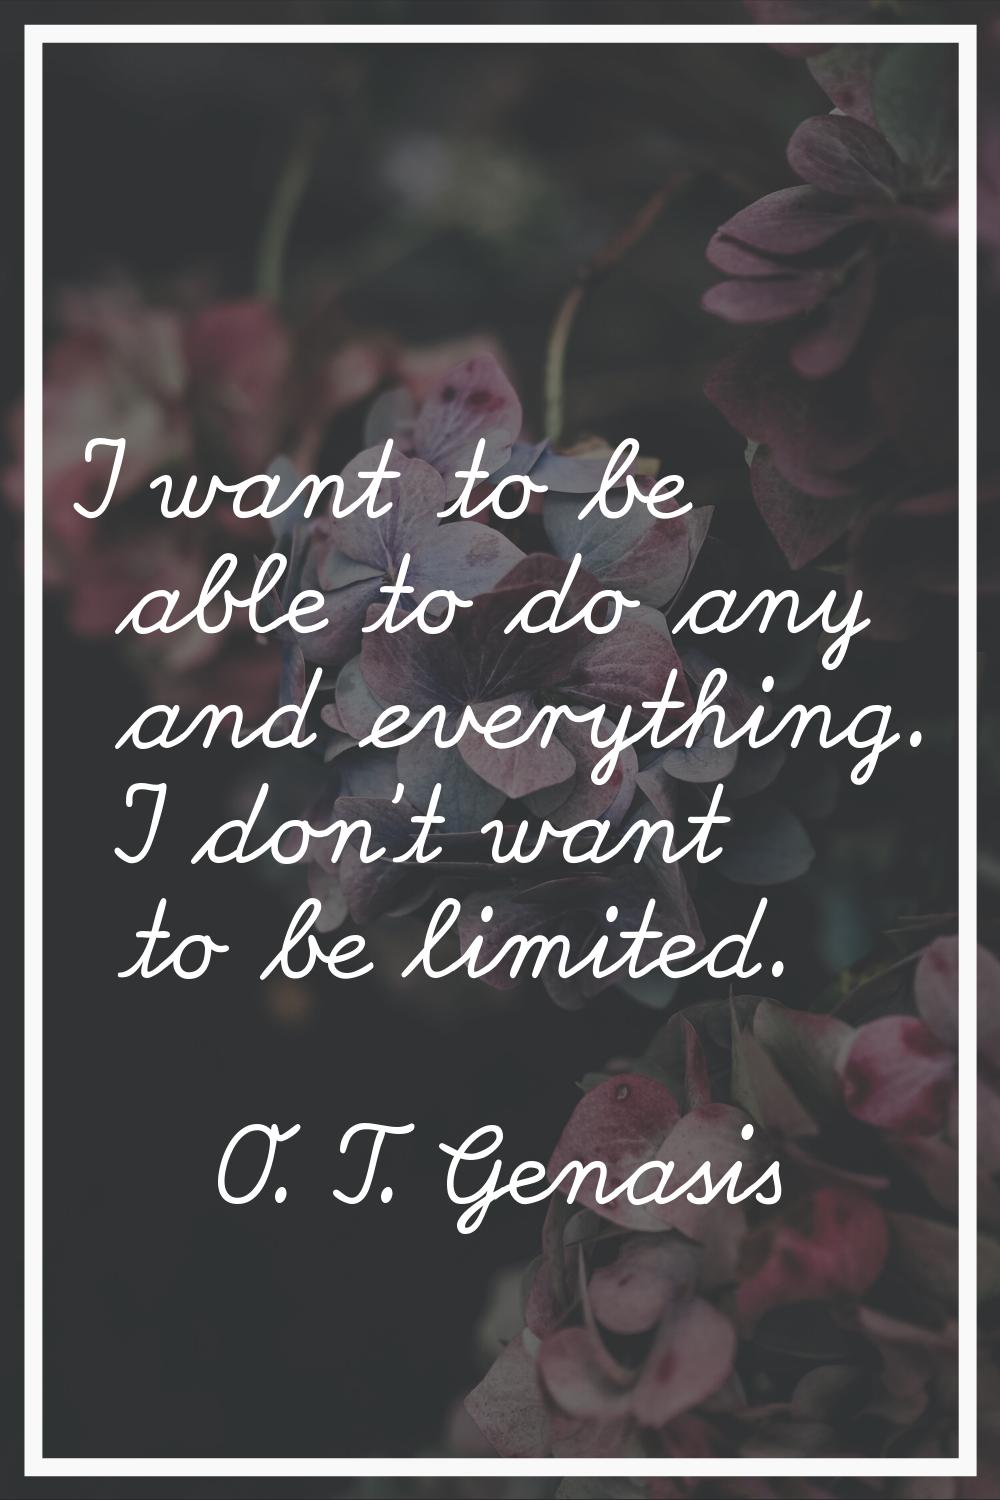 I want to be able to do any and everything. I don't want to be limited.